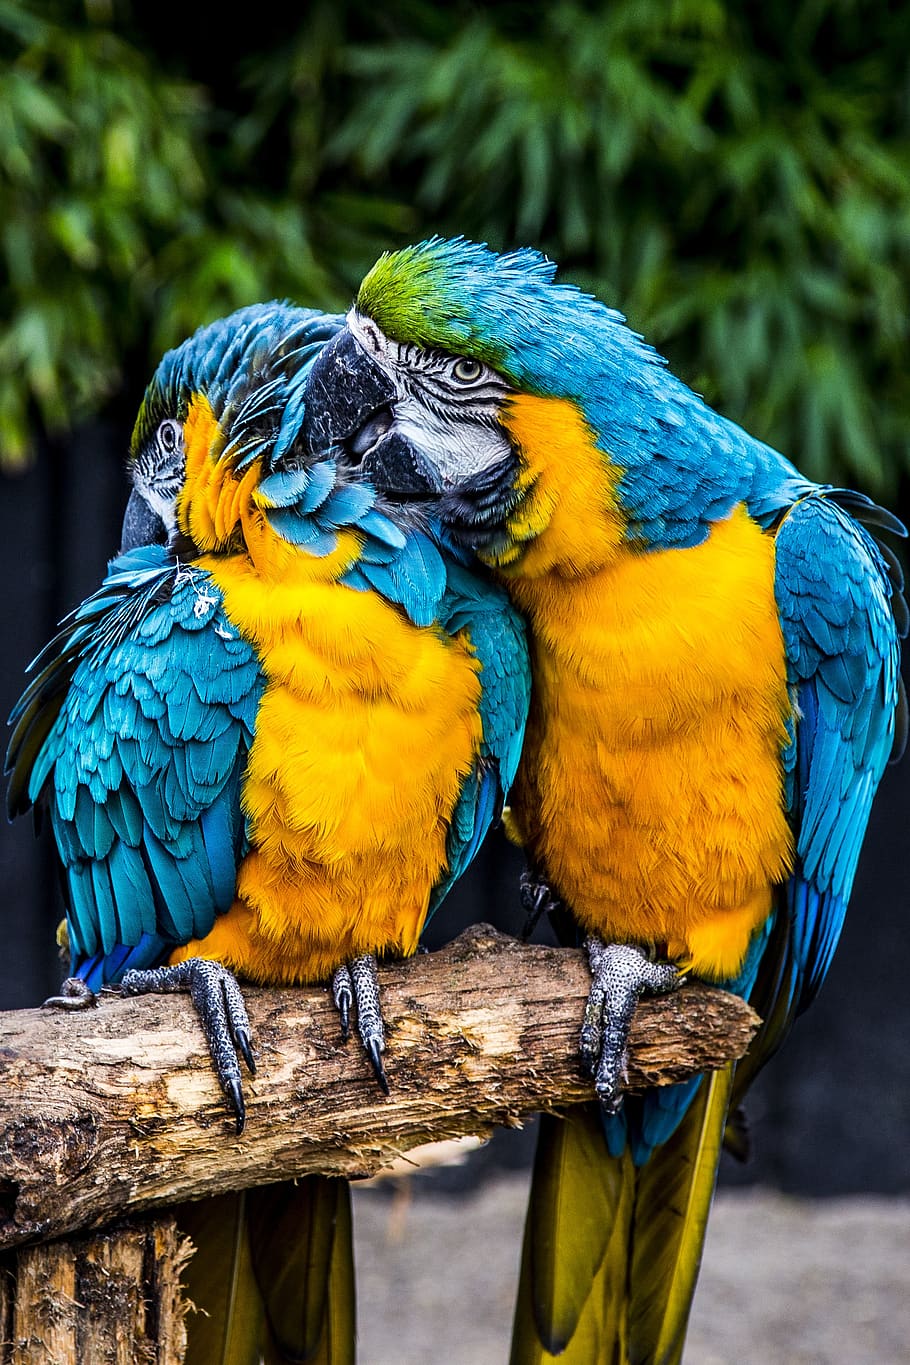 parrot, ara, bird, plumage, colorful, color, exotic, animal world, blue, yellow